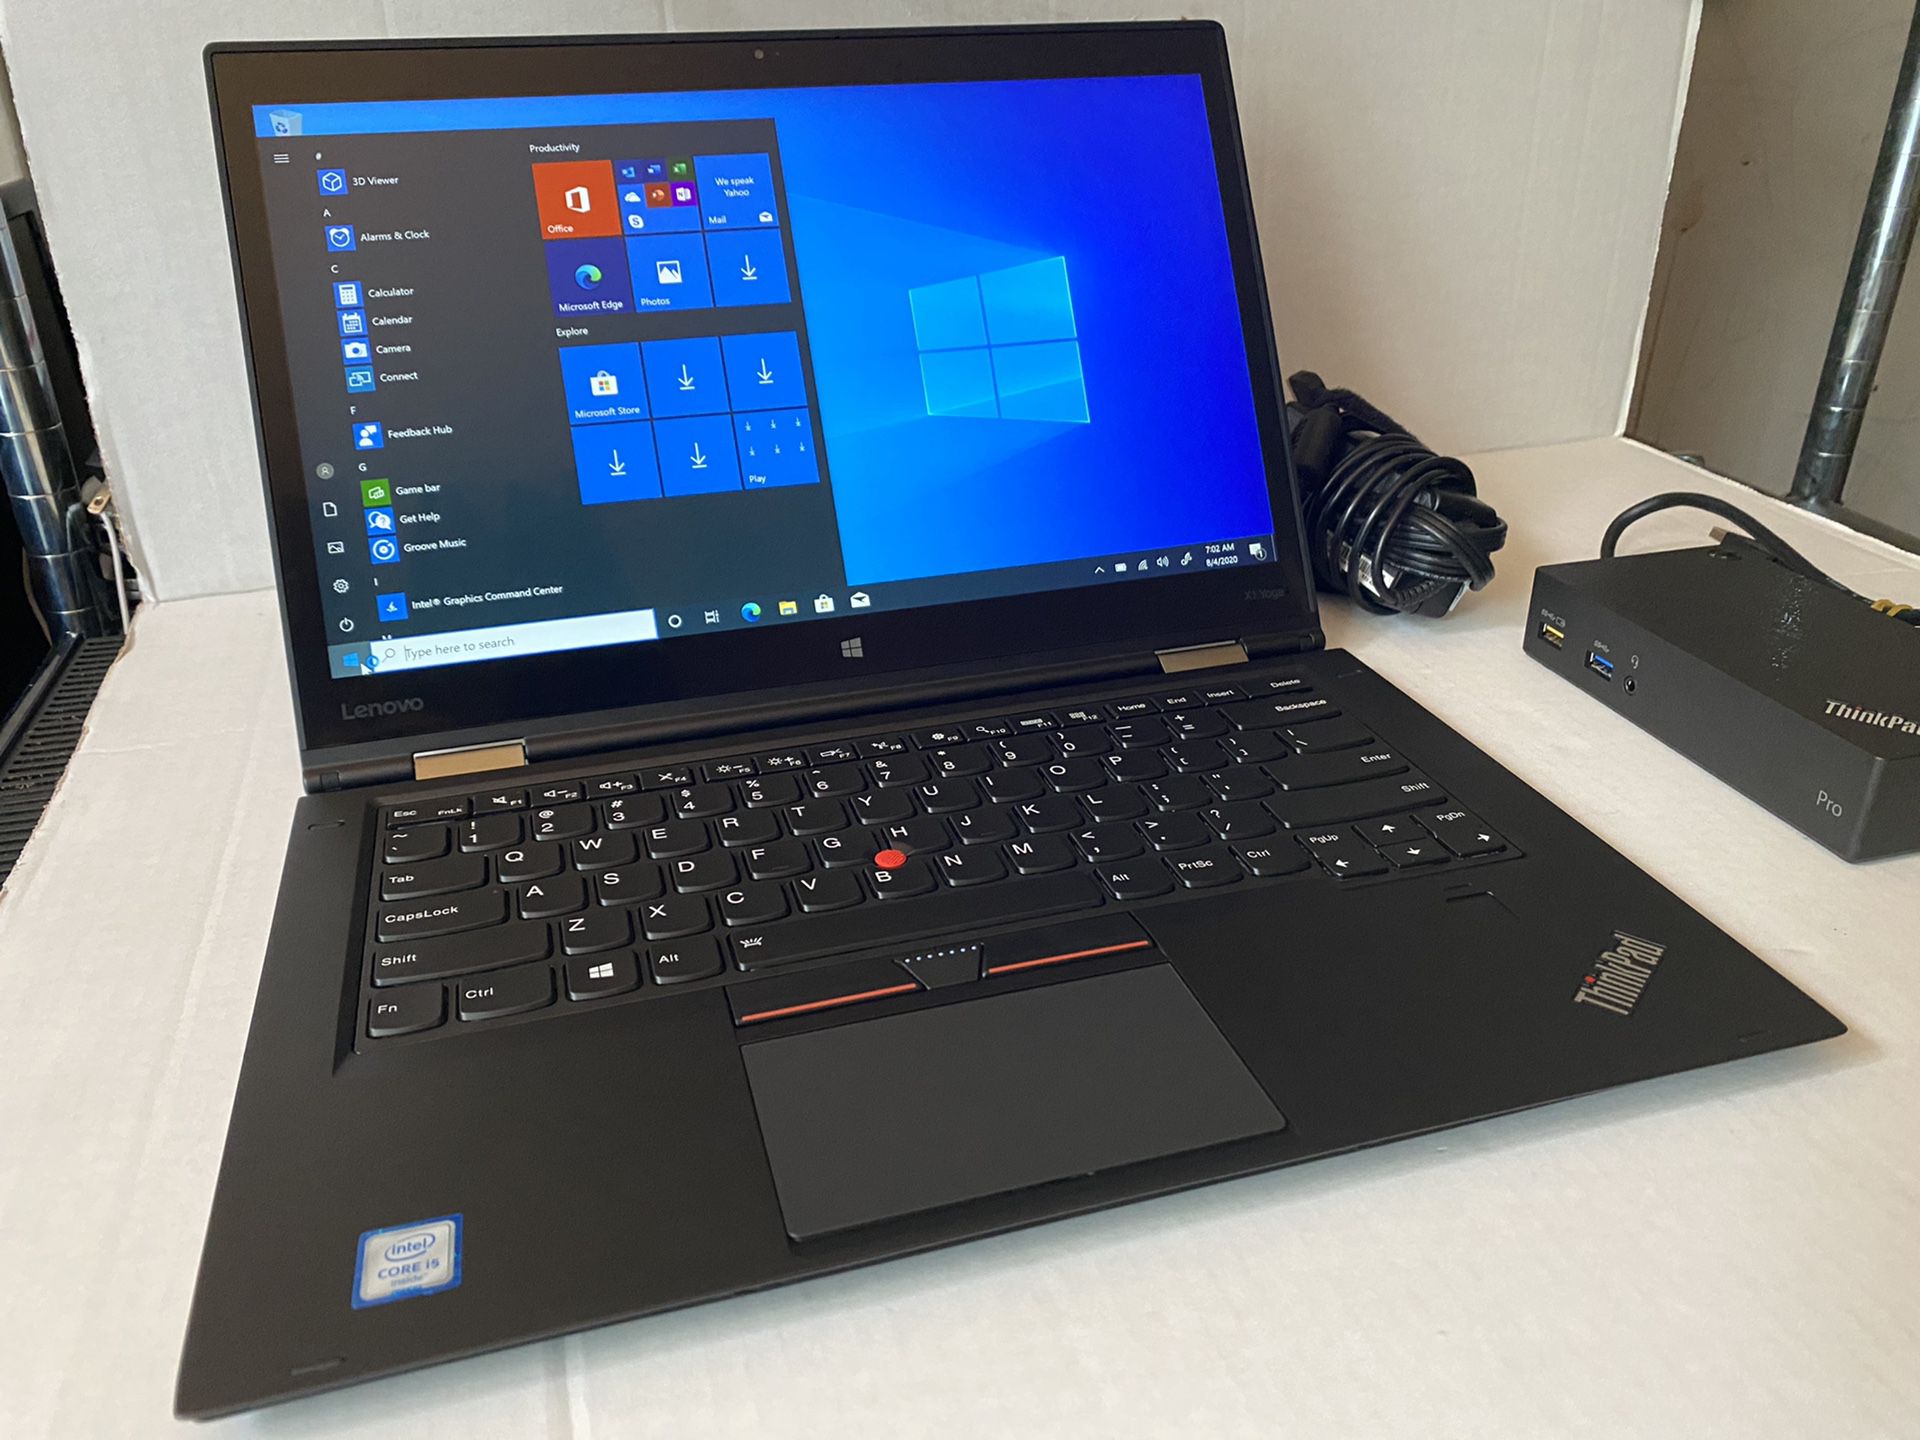 Touch Screen Lenovo ThinkPad X1 Yoga, with 500gb SSD, 8gb ram, docking station,charger windows 10 Pro Excellent condition. Works supper fast very sli